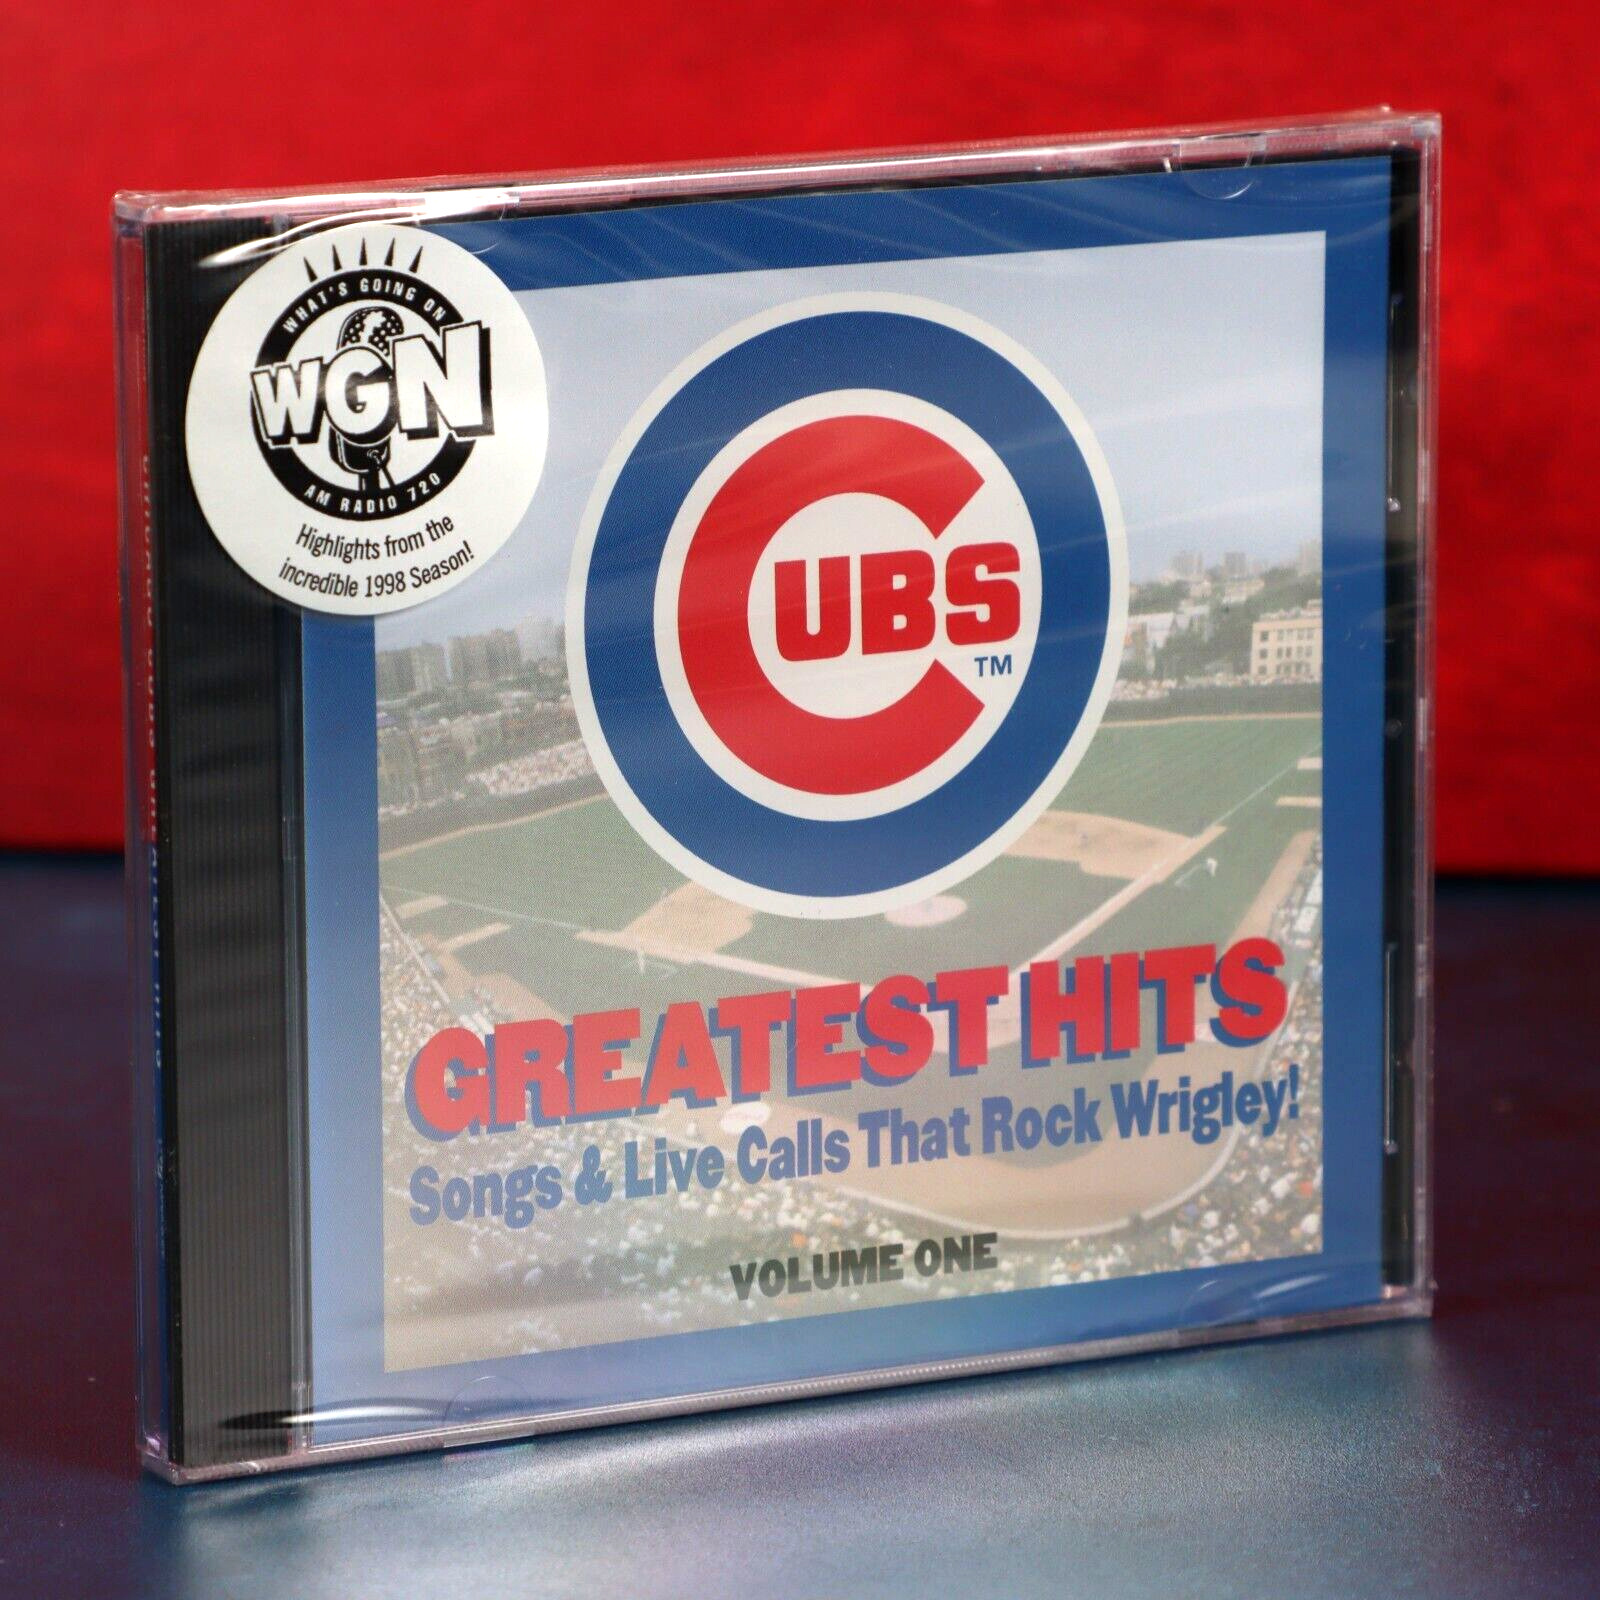 Chicago Cubs Greatest Hits Songs & Live Calls That Rock Wrigley CD Sealed